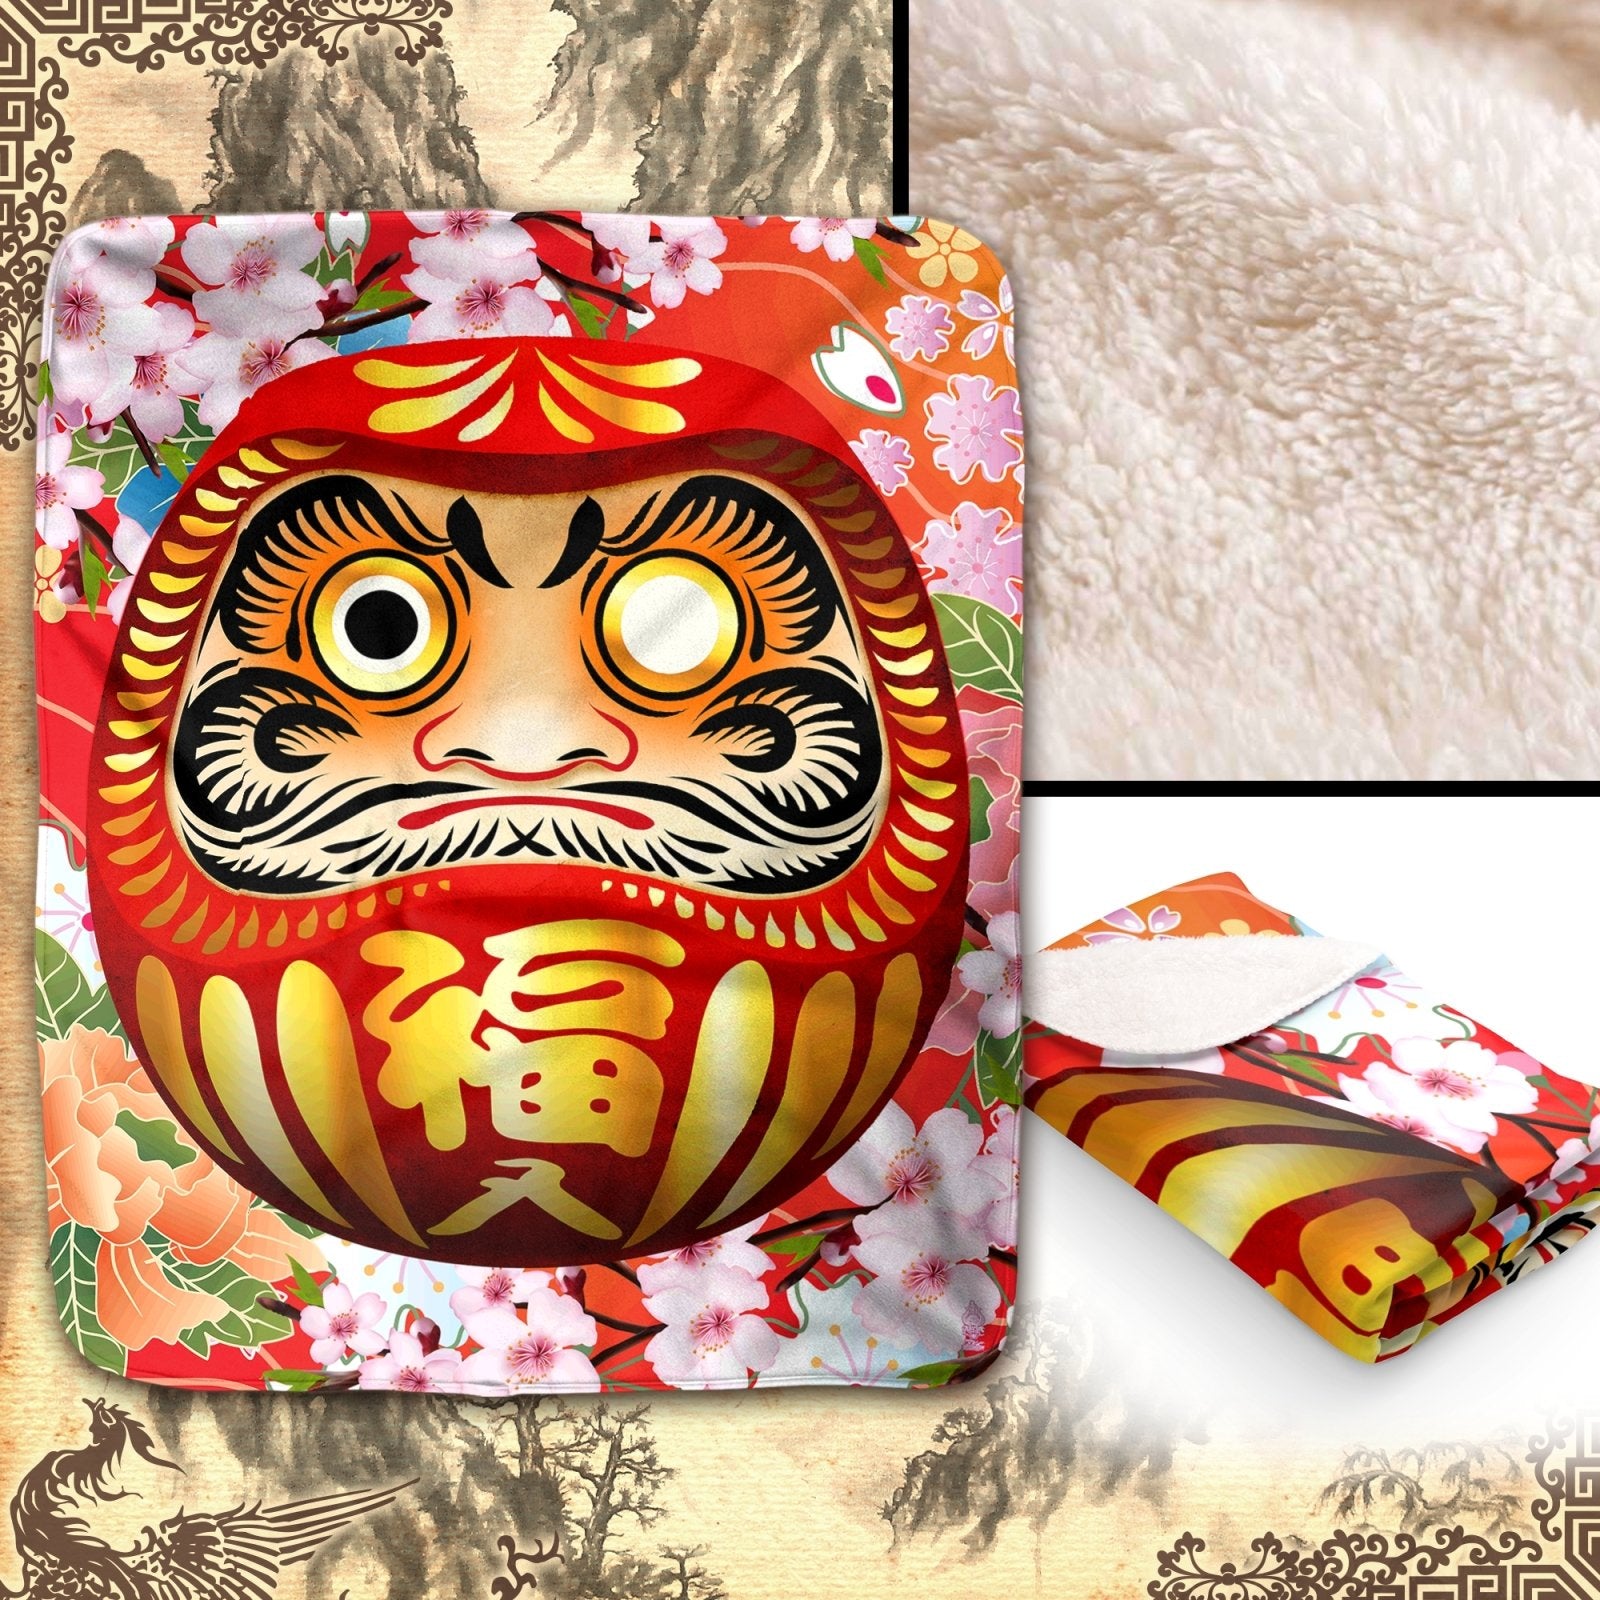 Daruma Throw Fleece Blanket, Japanese Anime and Manga, Indie and Ecclectic Decor, Eclectic and Funky Gift - Red - Abysm Internal